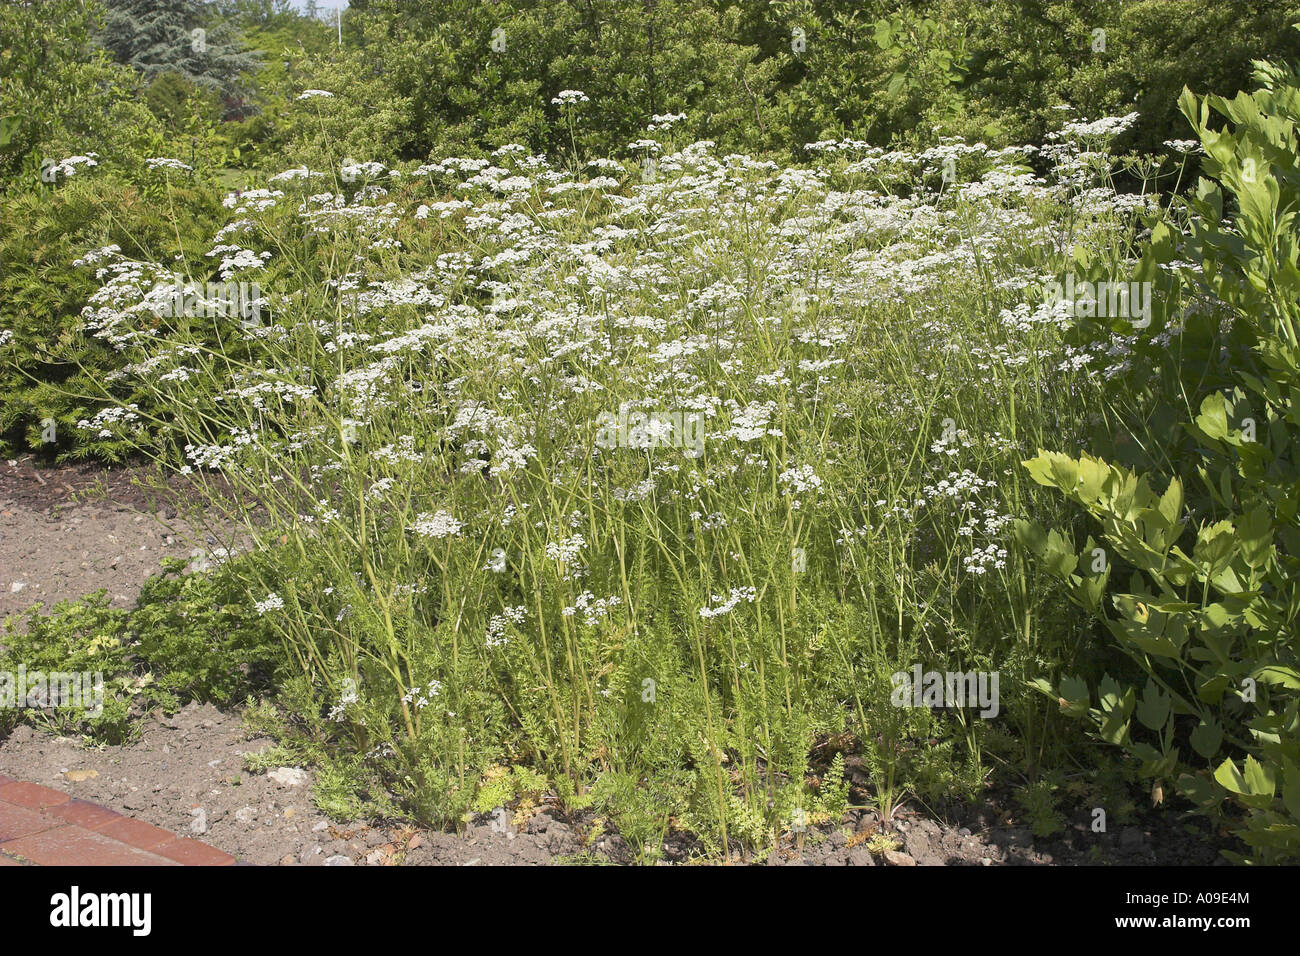 common caraway (Carum carvi), blooming Stock Photo